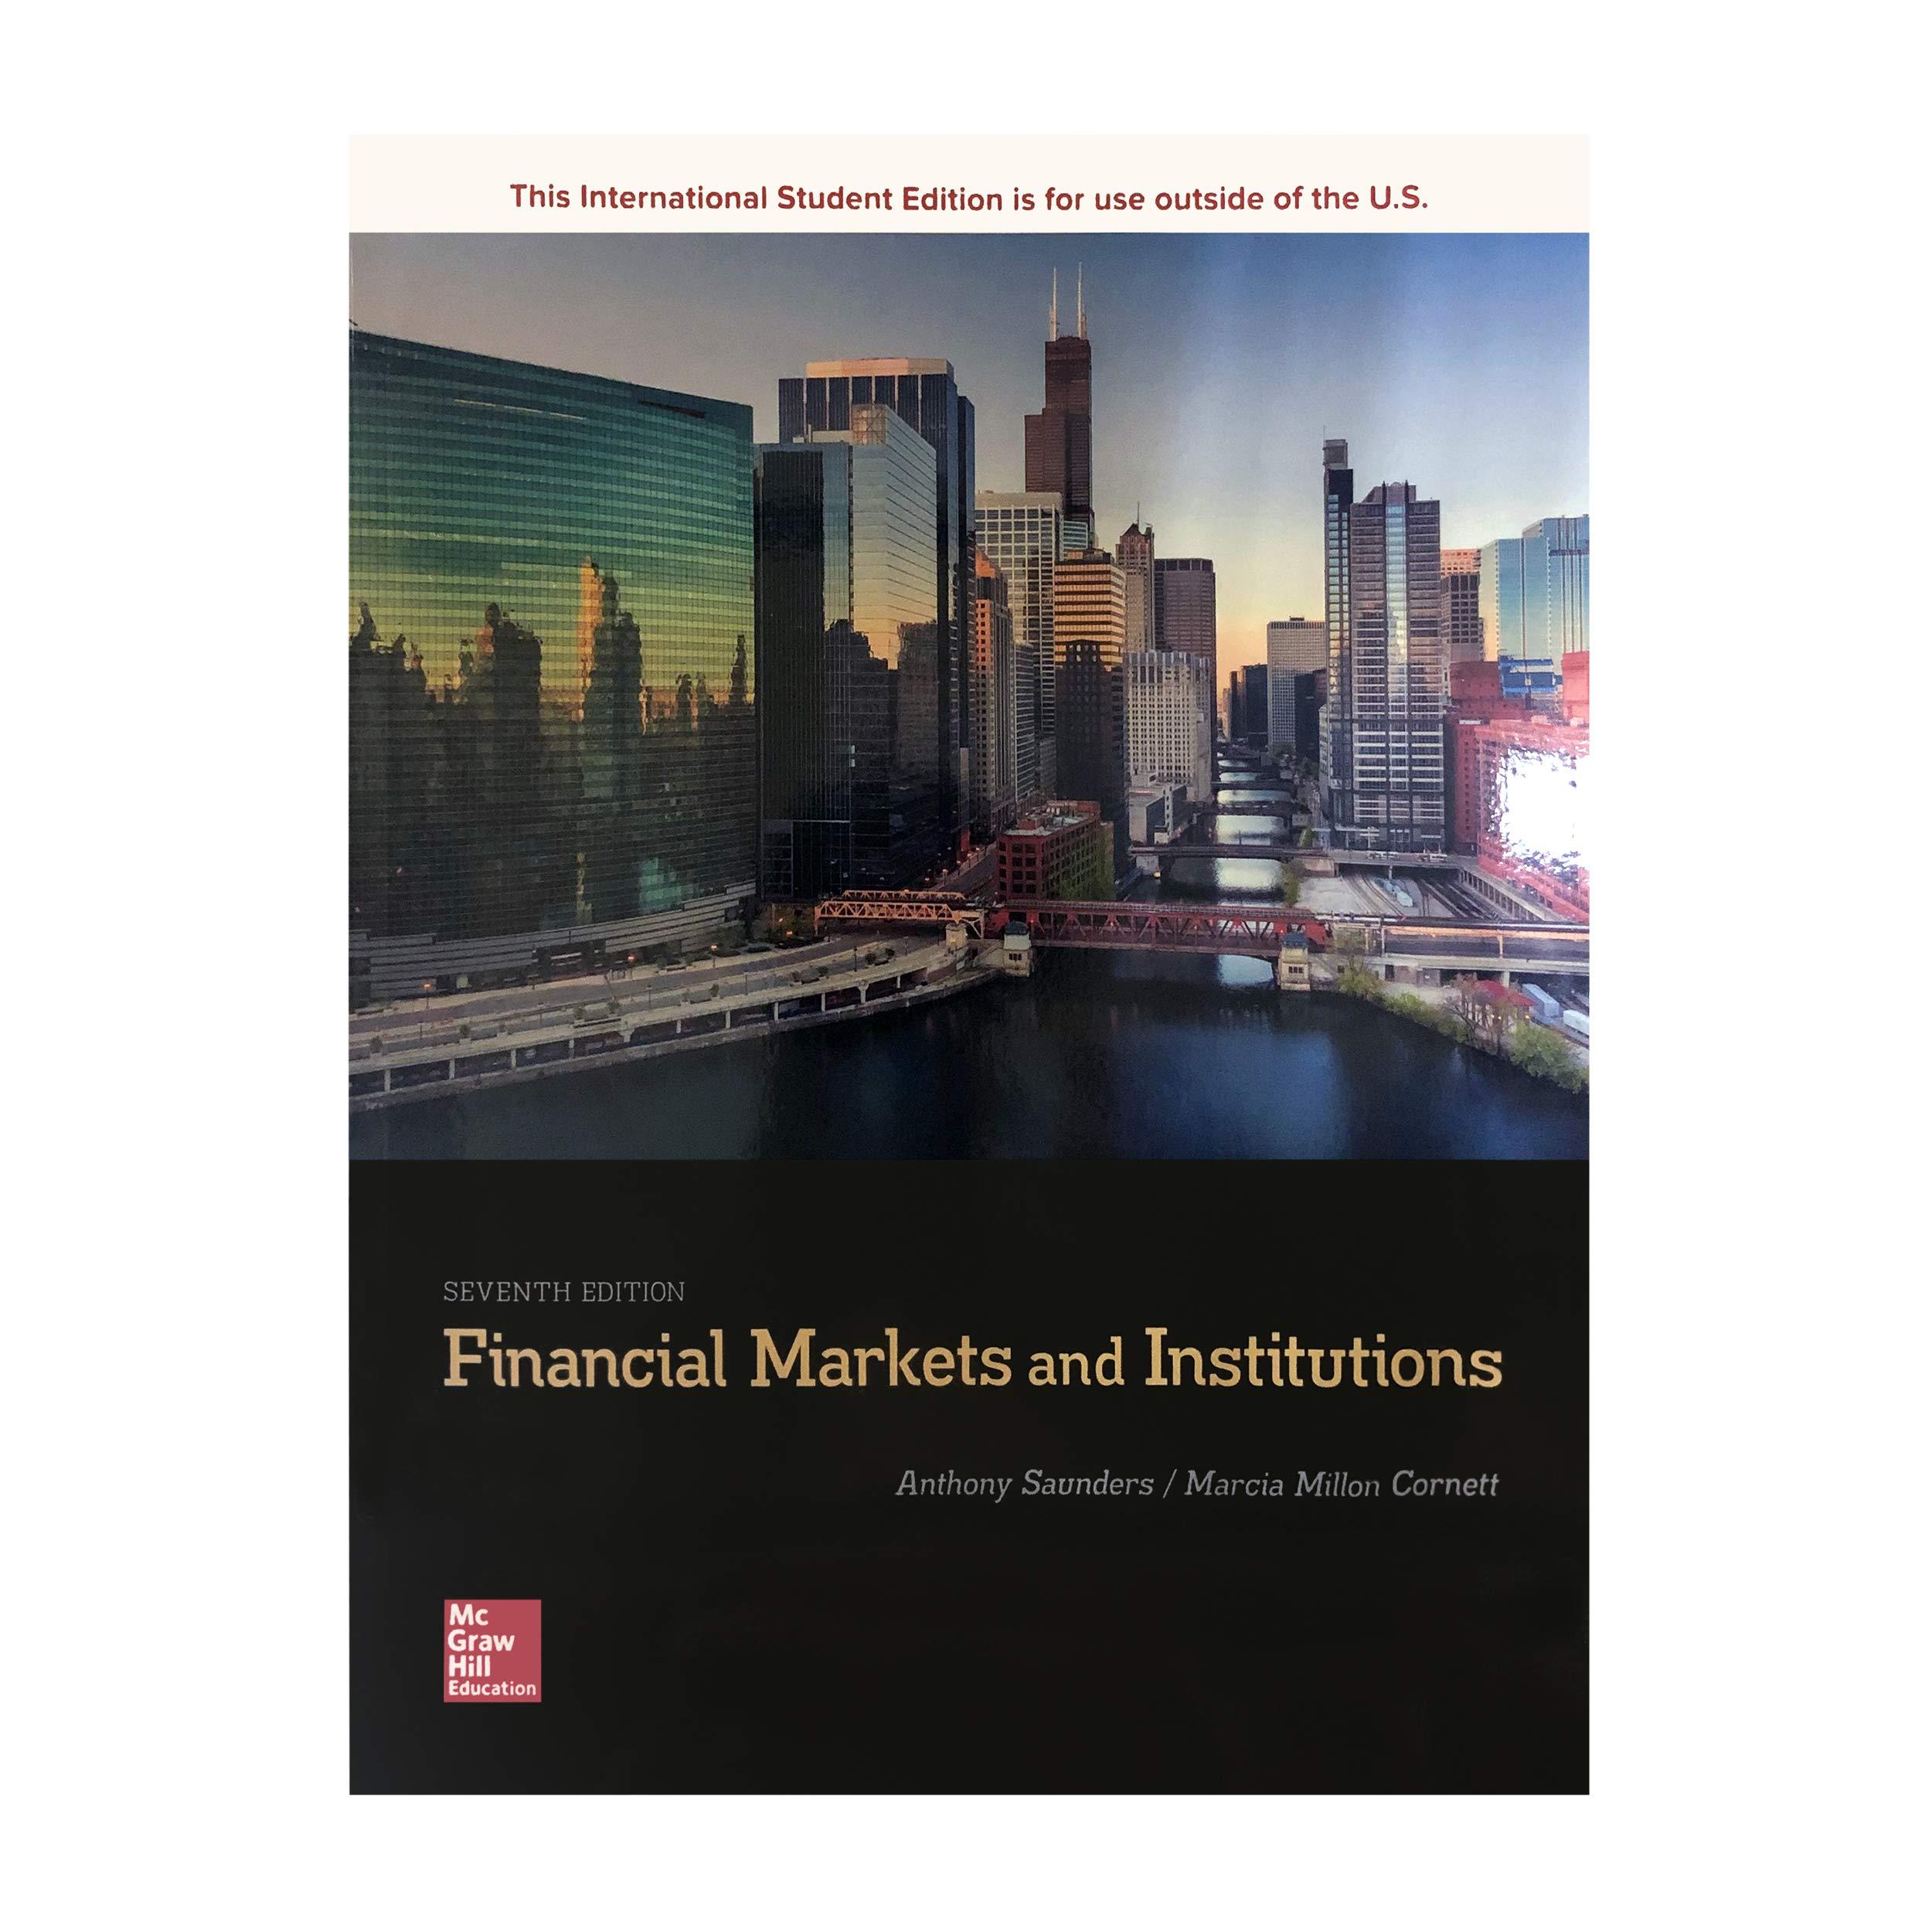 financial markets and institutions 7th international edition anthony saunders, marcia cornett 1260091953,